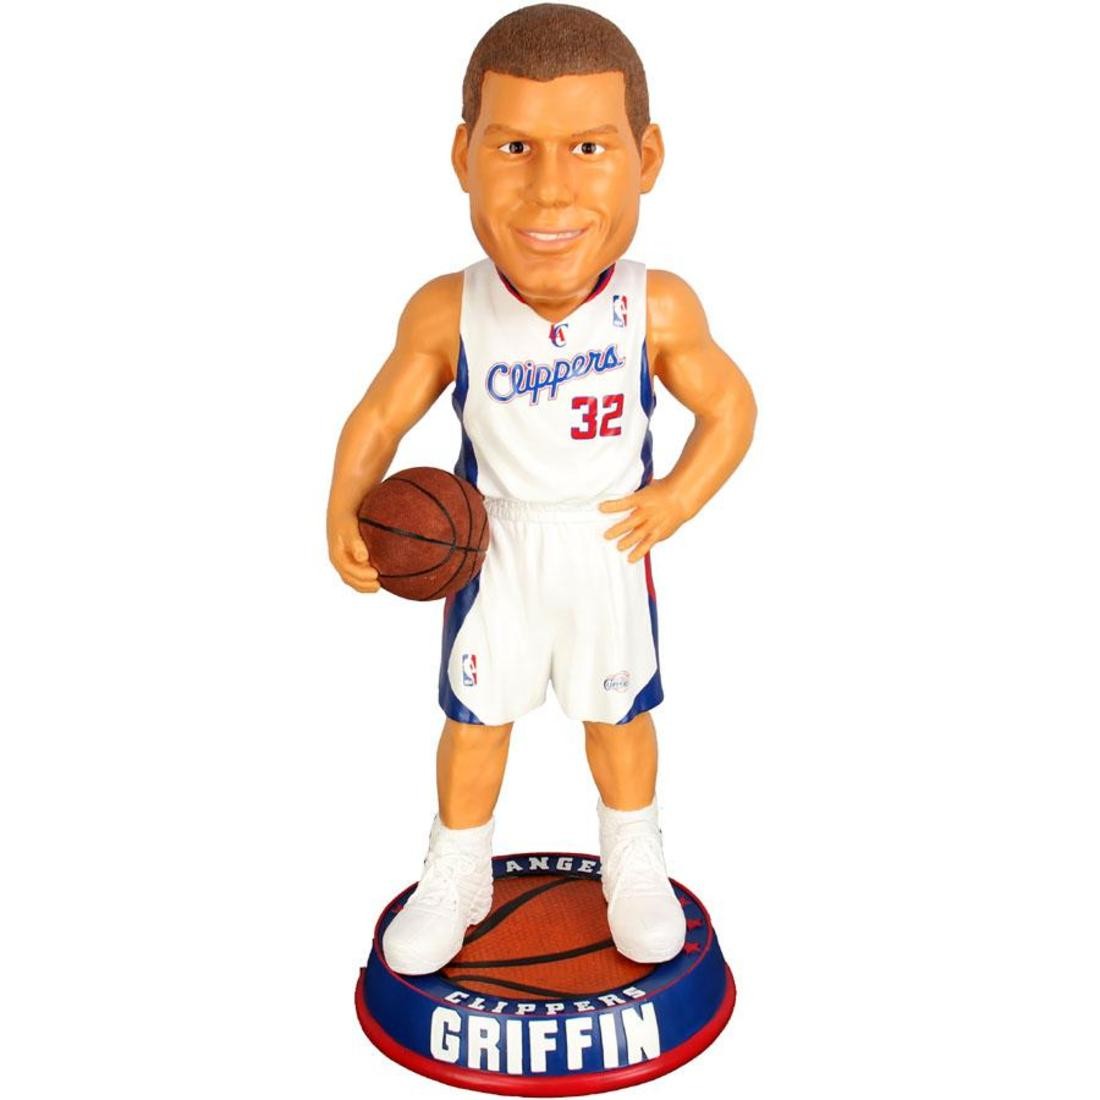 Forever Collectibles Blake Griffin 36 Inch Bobblehead - Home Jersey (white) - PYS.com Exclusive